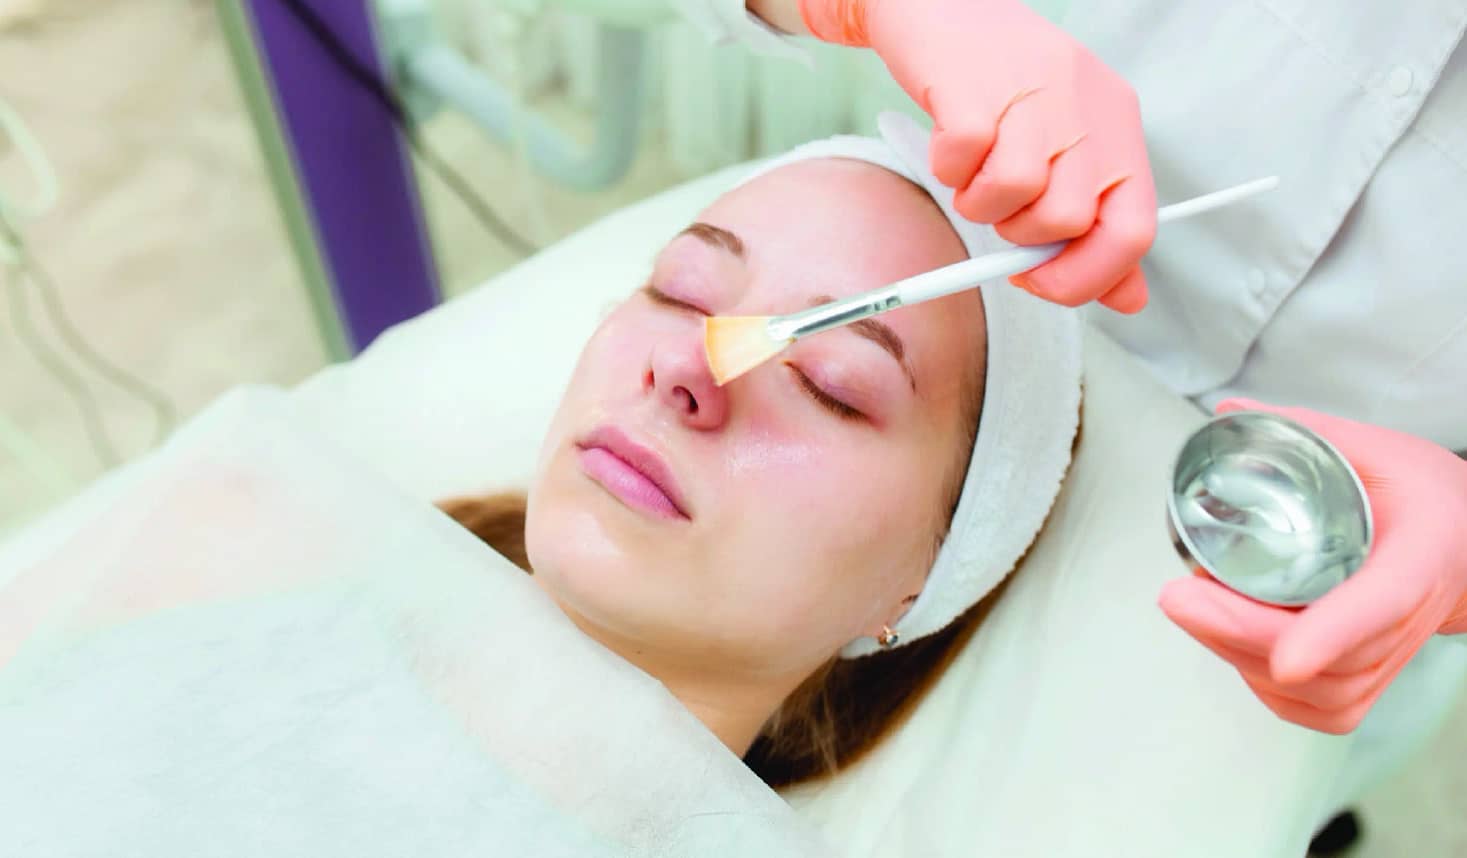 Woman undergoing a chemical peel treatment to rejuvenate their skin and reduce wrinkles.